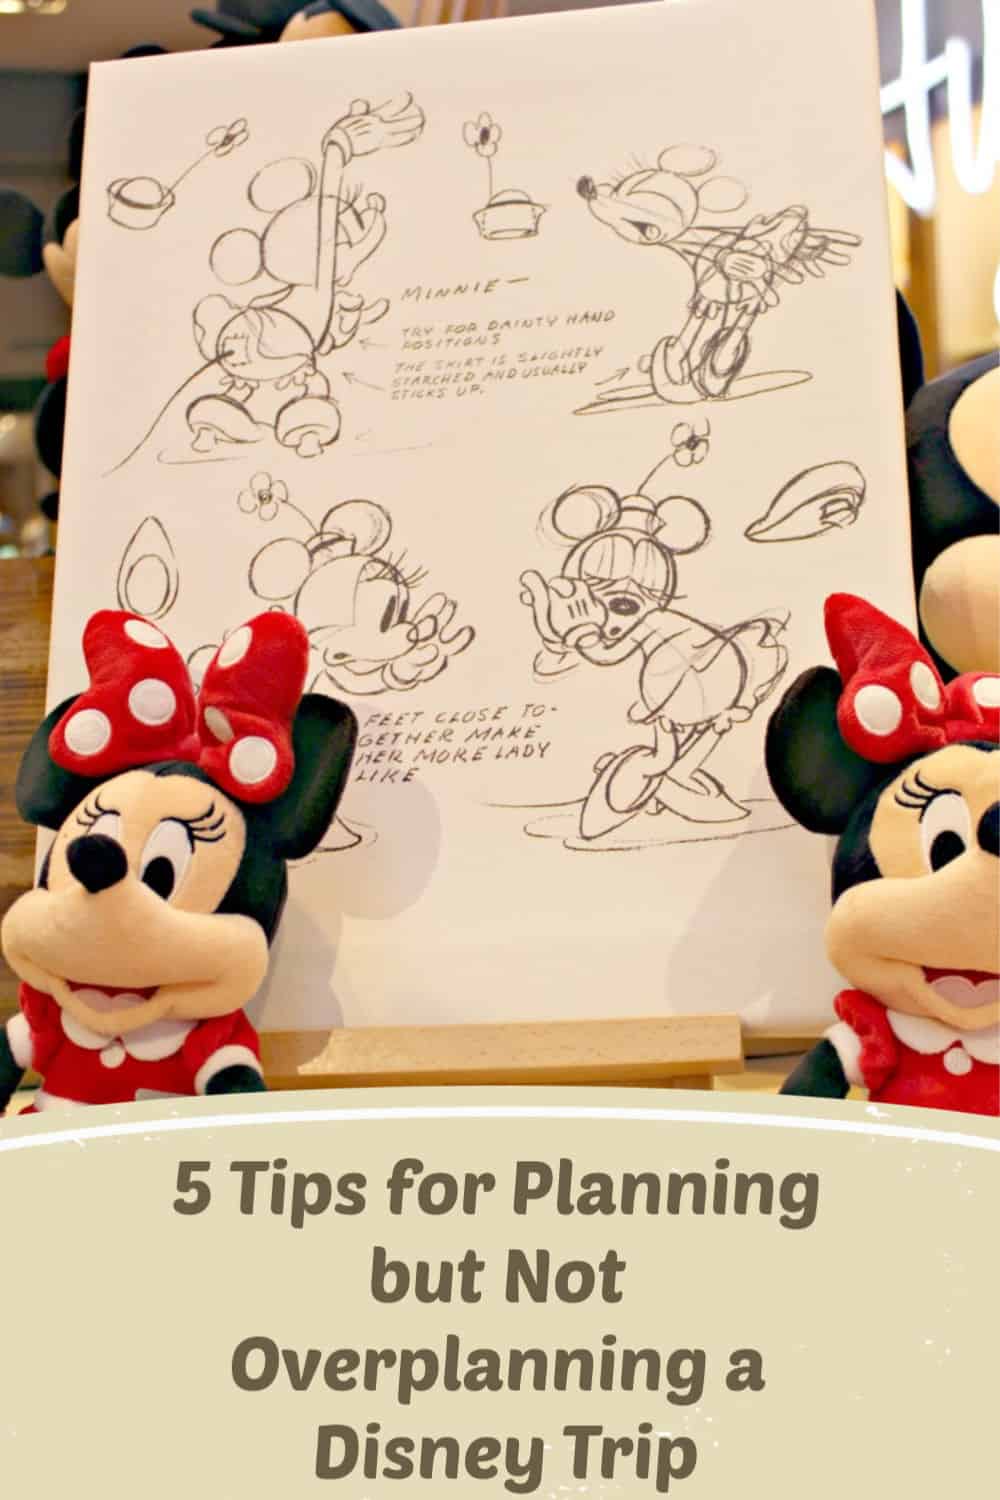 5 Tips for Planning but Not Overplanning a Disney Trip - Don't overplan your Disney trip with these tips to make the most of your Disney vacation